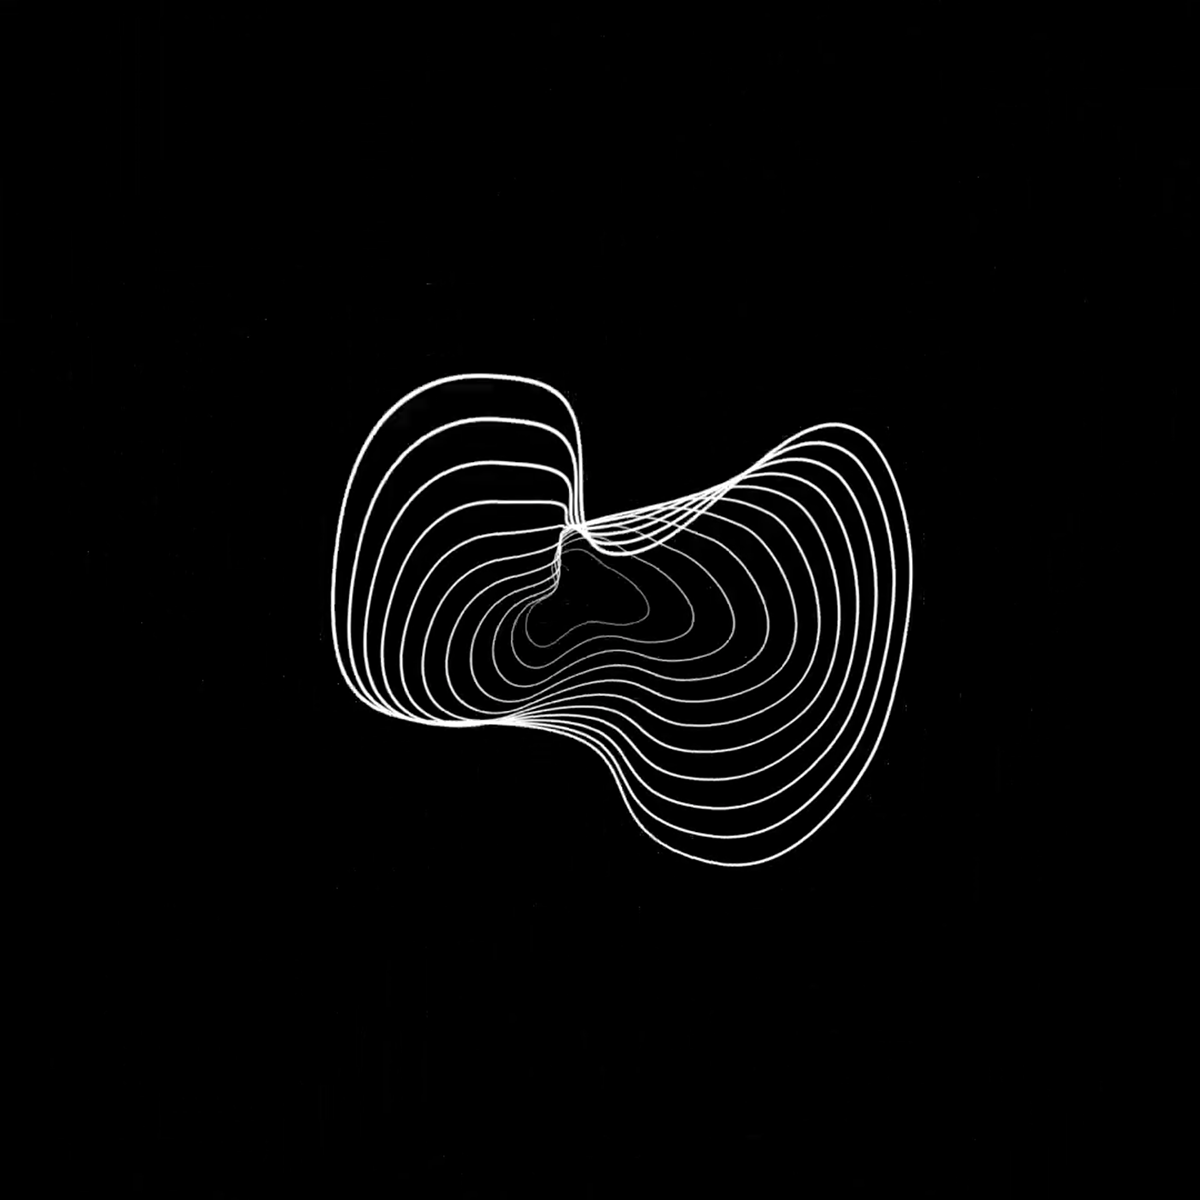 joren peters EJLN motion design graphic visual moire motion video black white pattern lines trippy psychedelic after effects